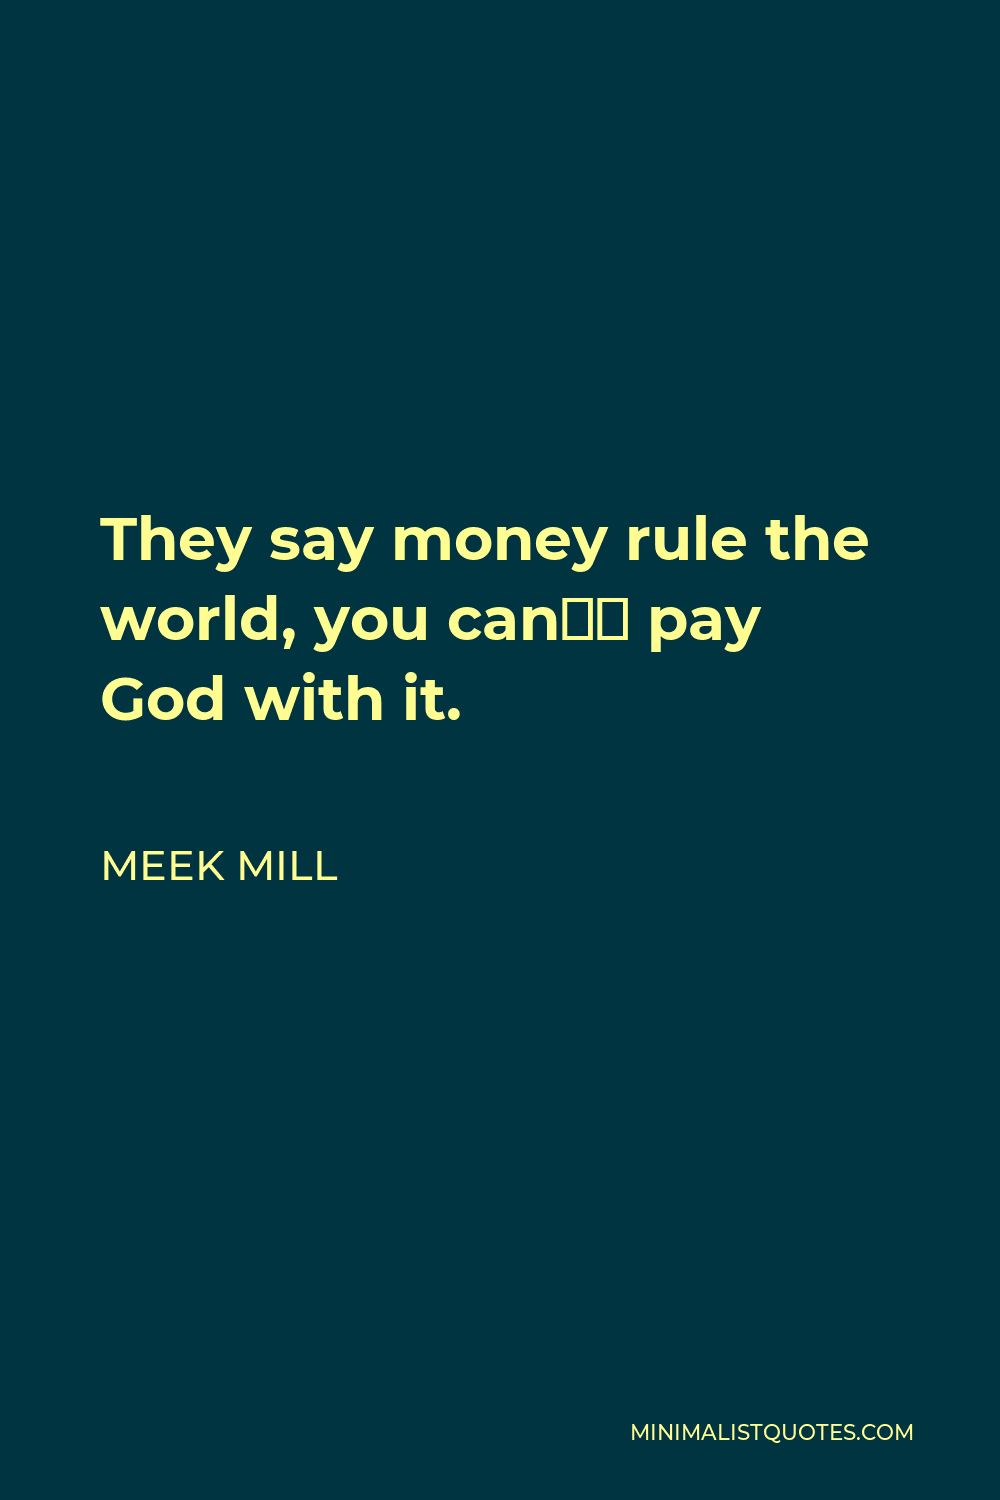 Meek Mill Quote - They say money rule the world, you can’t pay God with it.